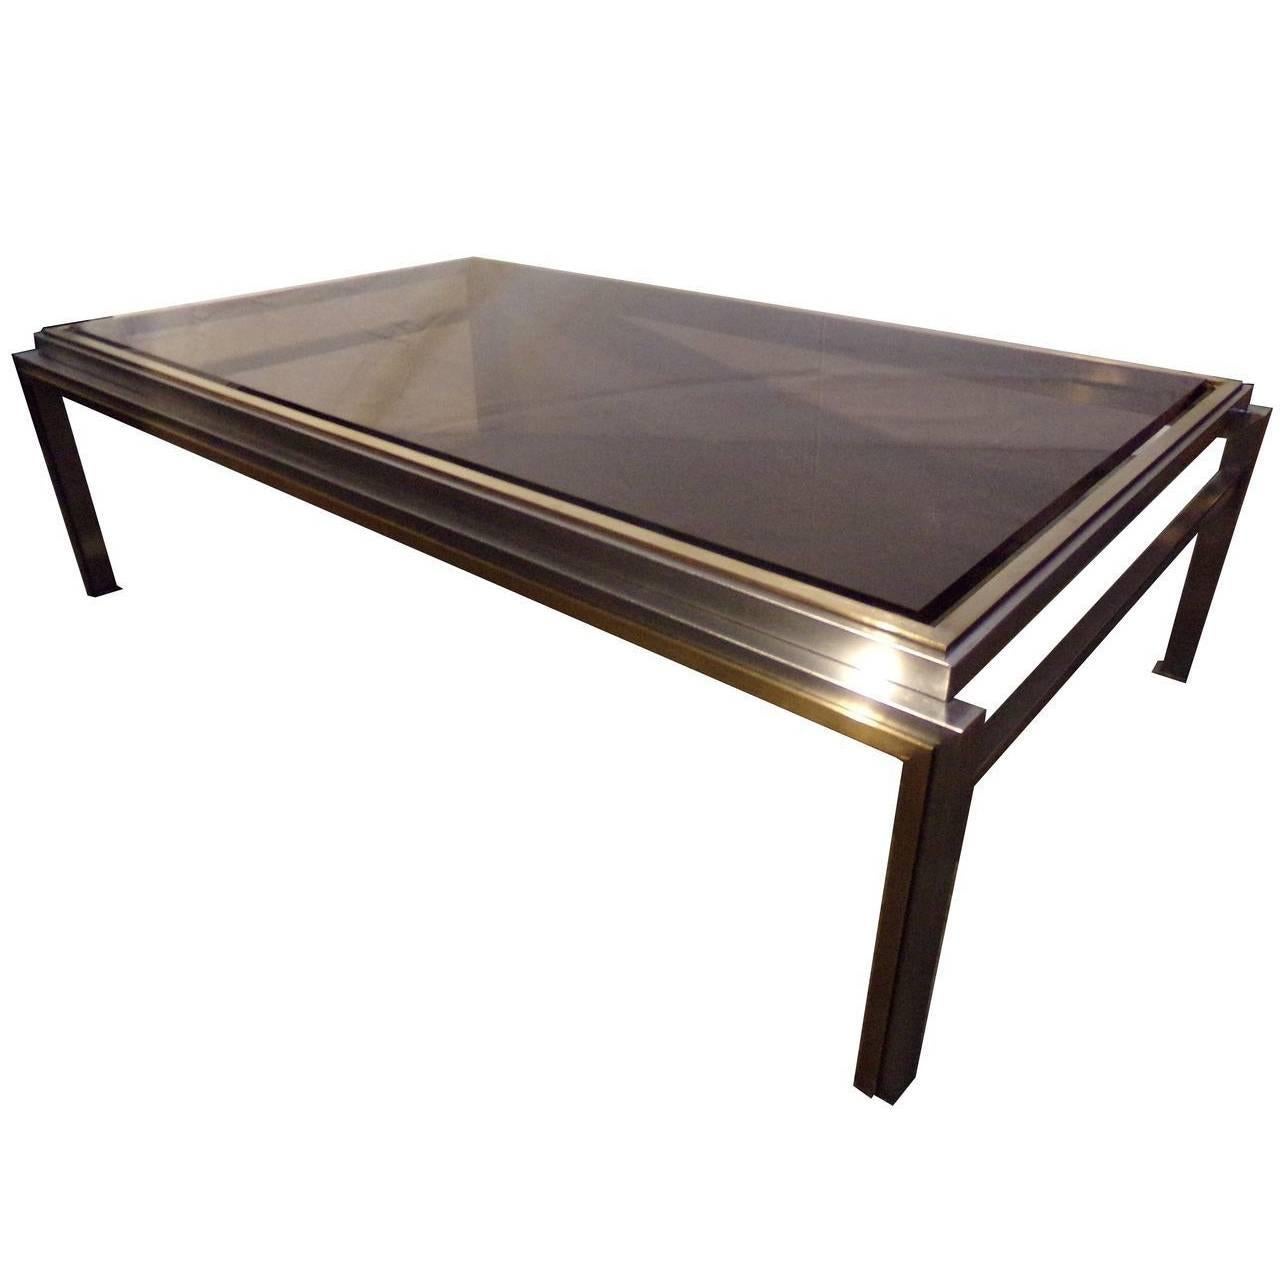 Nice Willy Rizzo Coffee Table, 1970s, Chrome / Gilded Chrome, Smoked Glass Top